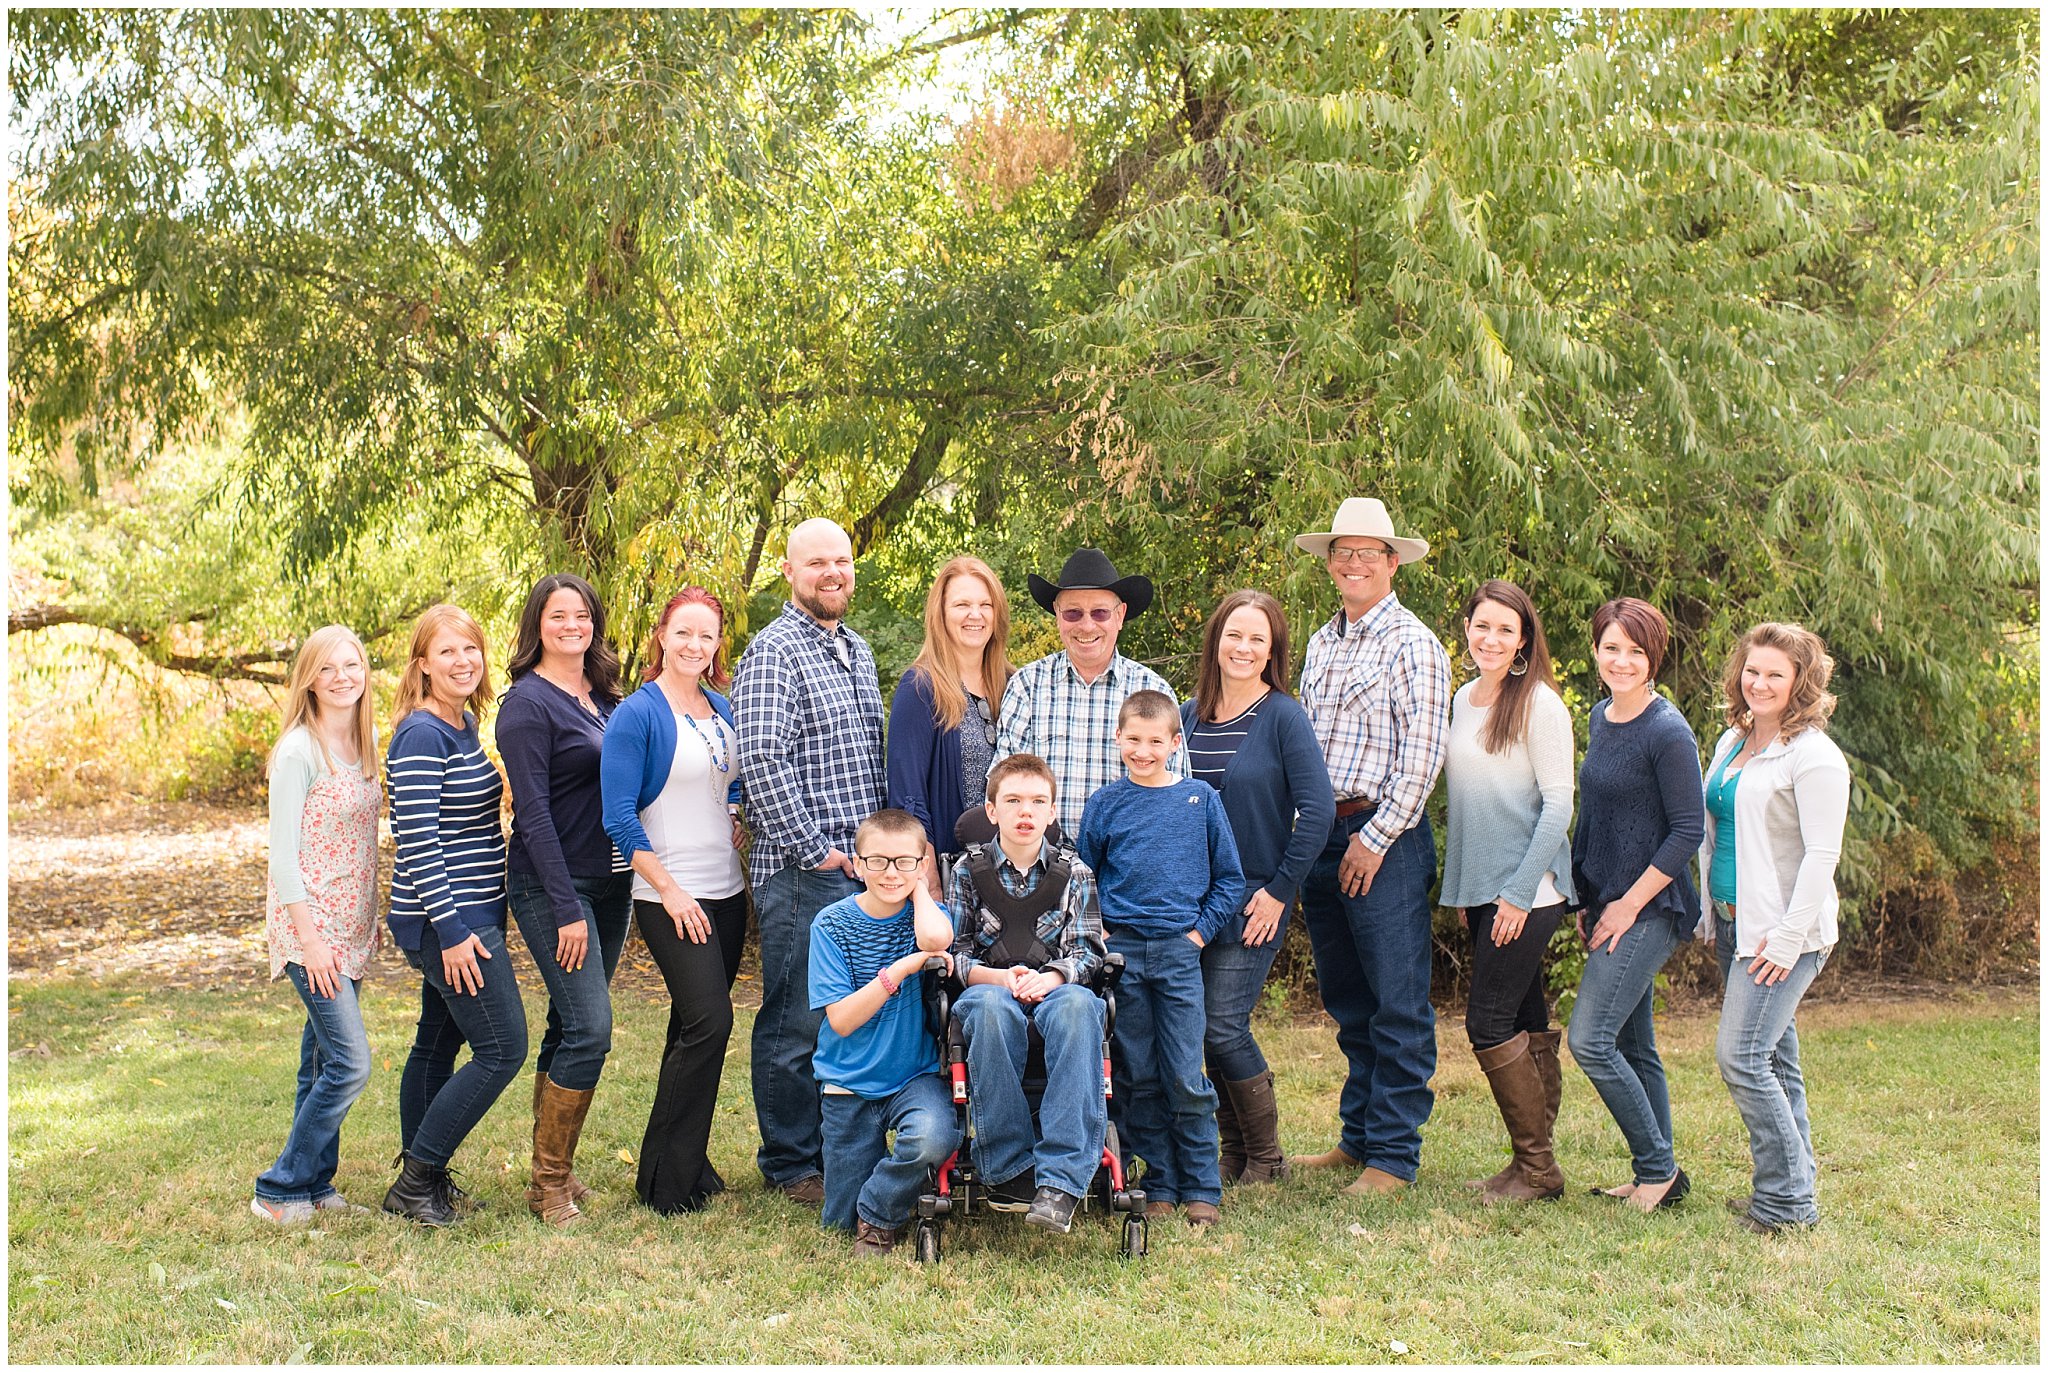 Large family of 12 adult kids | Tremonton Family Pictures and Make a Wish Event | Jessie and Dallin Photography